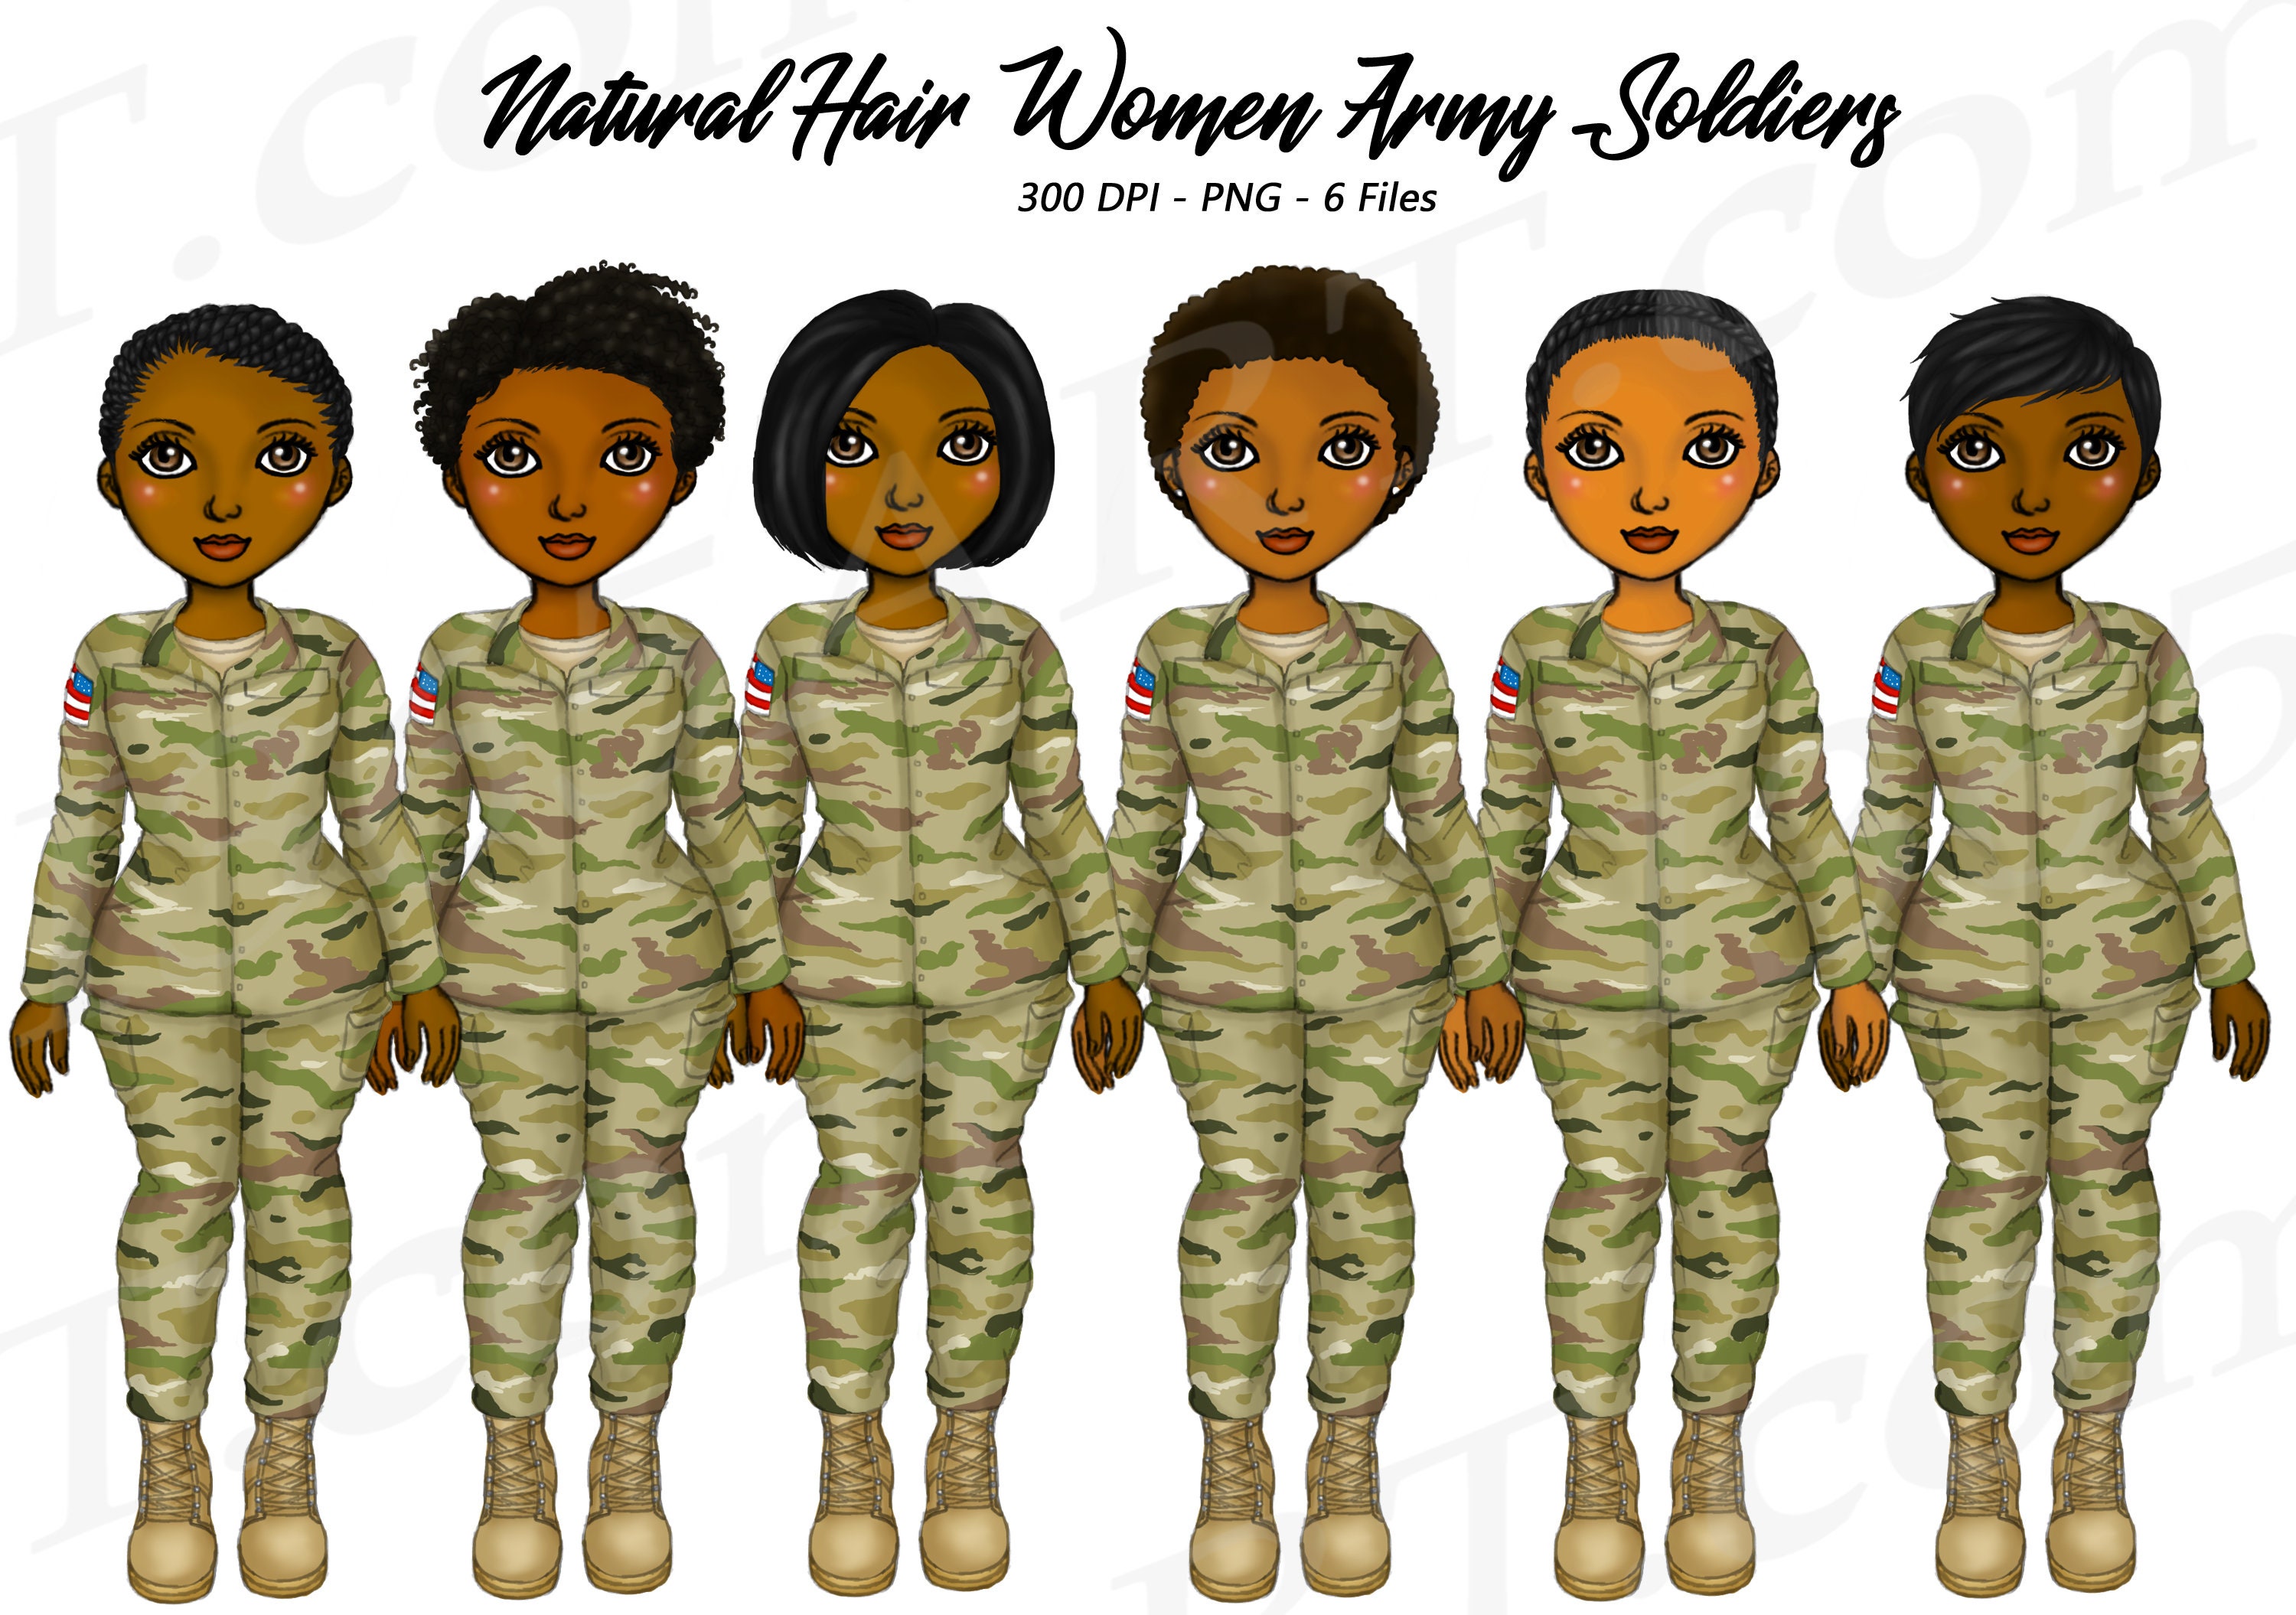 Womens Army Corps (WAC) - Hobby - Posters and Art Prints | TeePublic